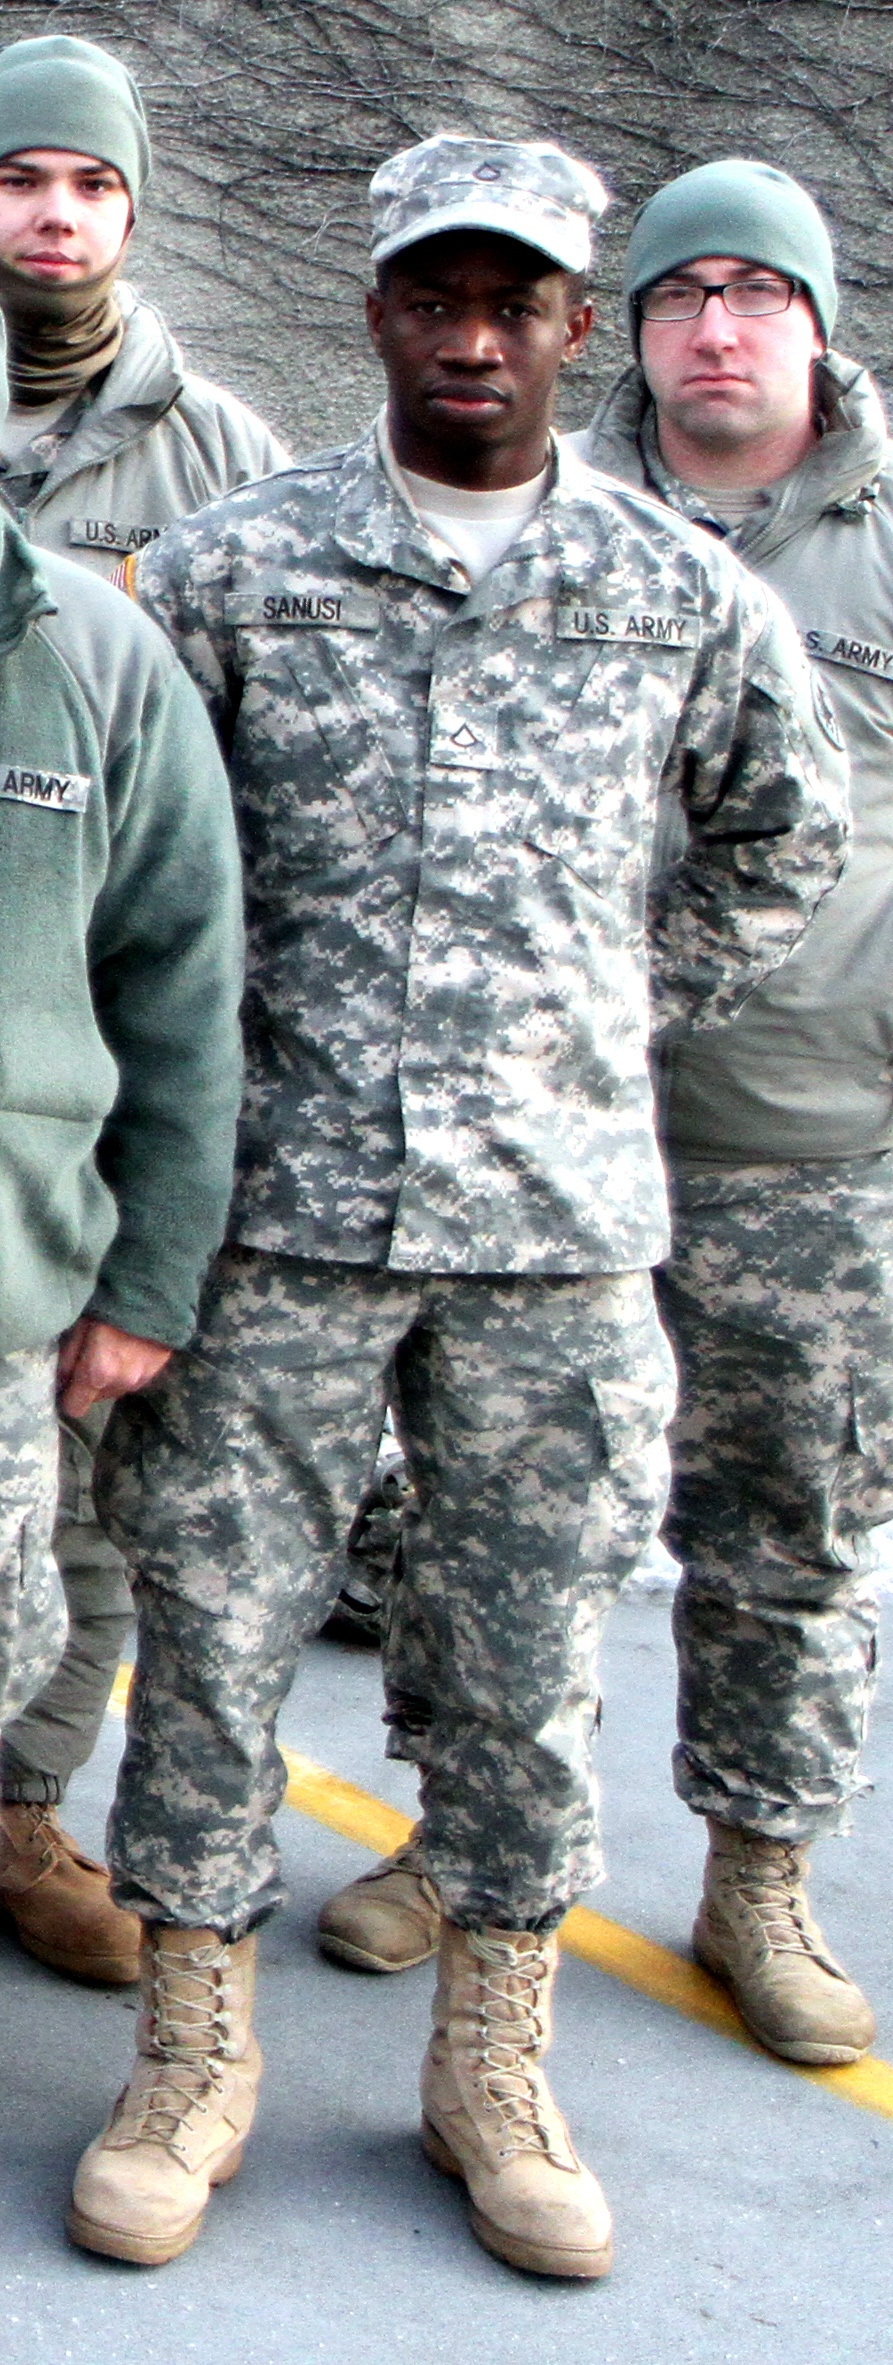 Michigan National Guard member from Detroit supports Flint water assistance mission